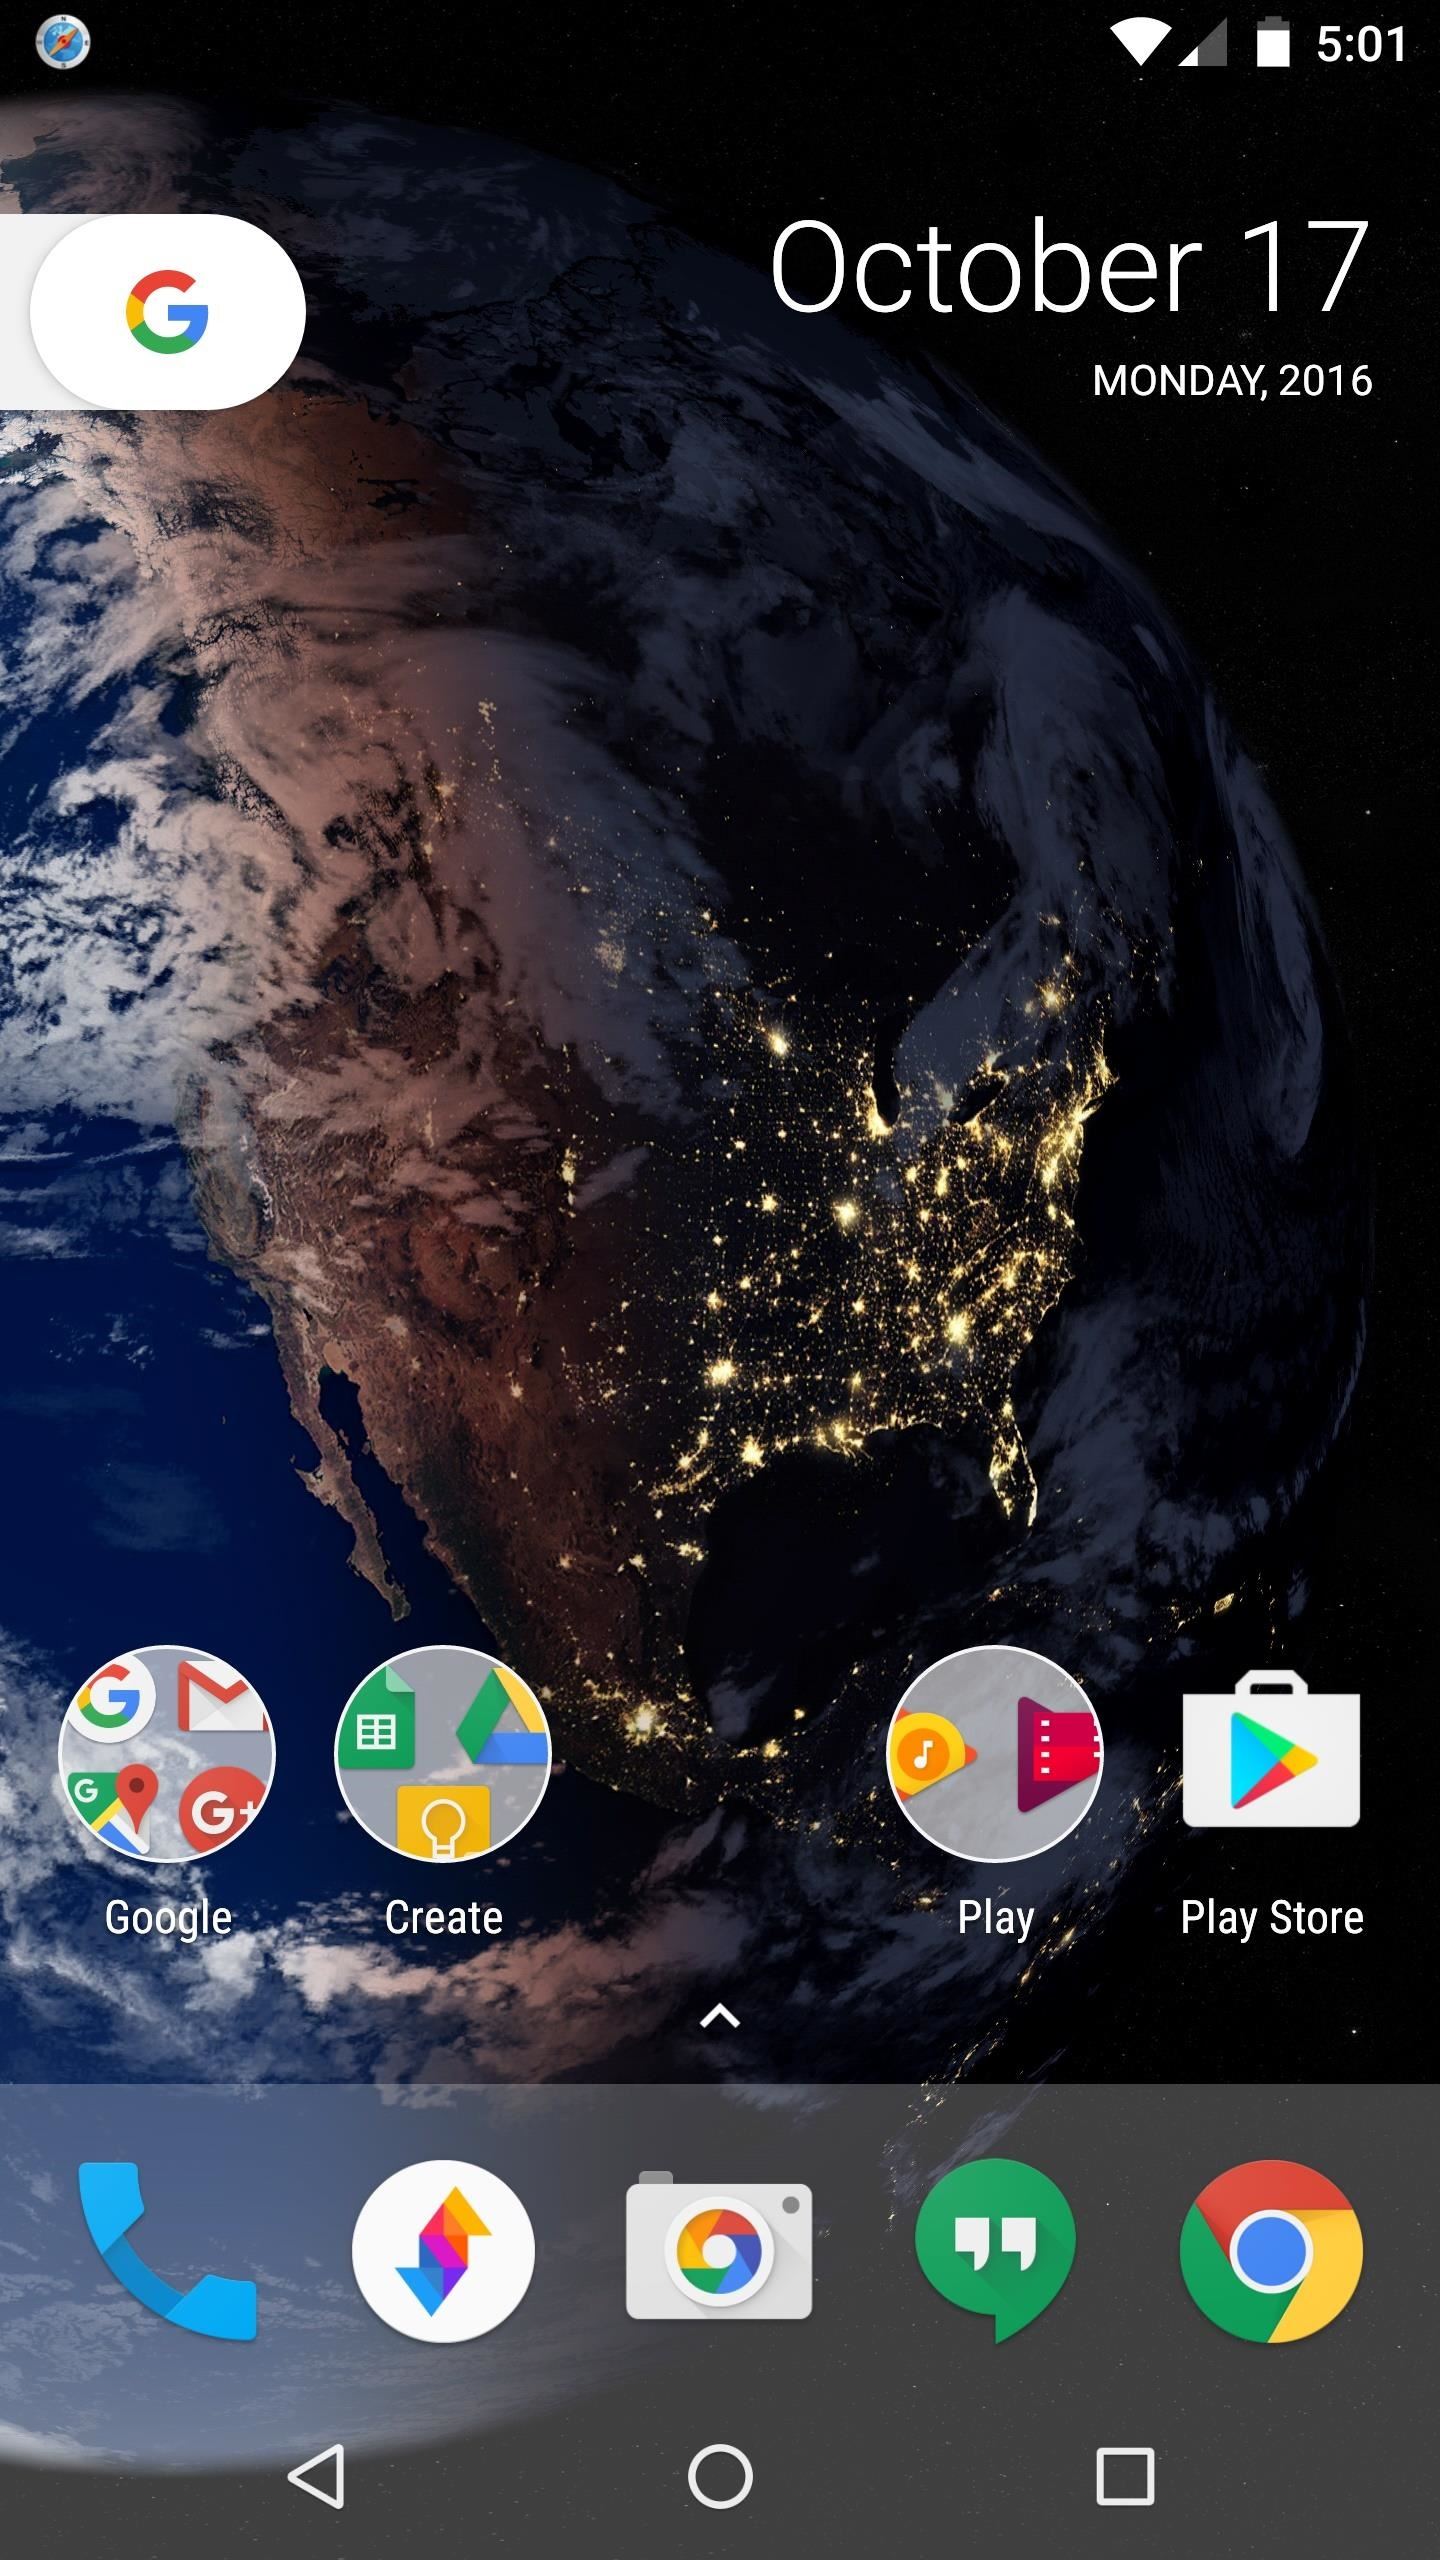 How to Get the Pixel's Amazing New 'Live Earth' Wallpapers on Your Android Device